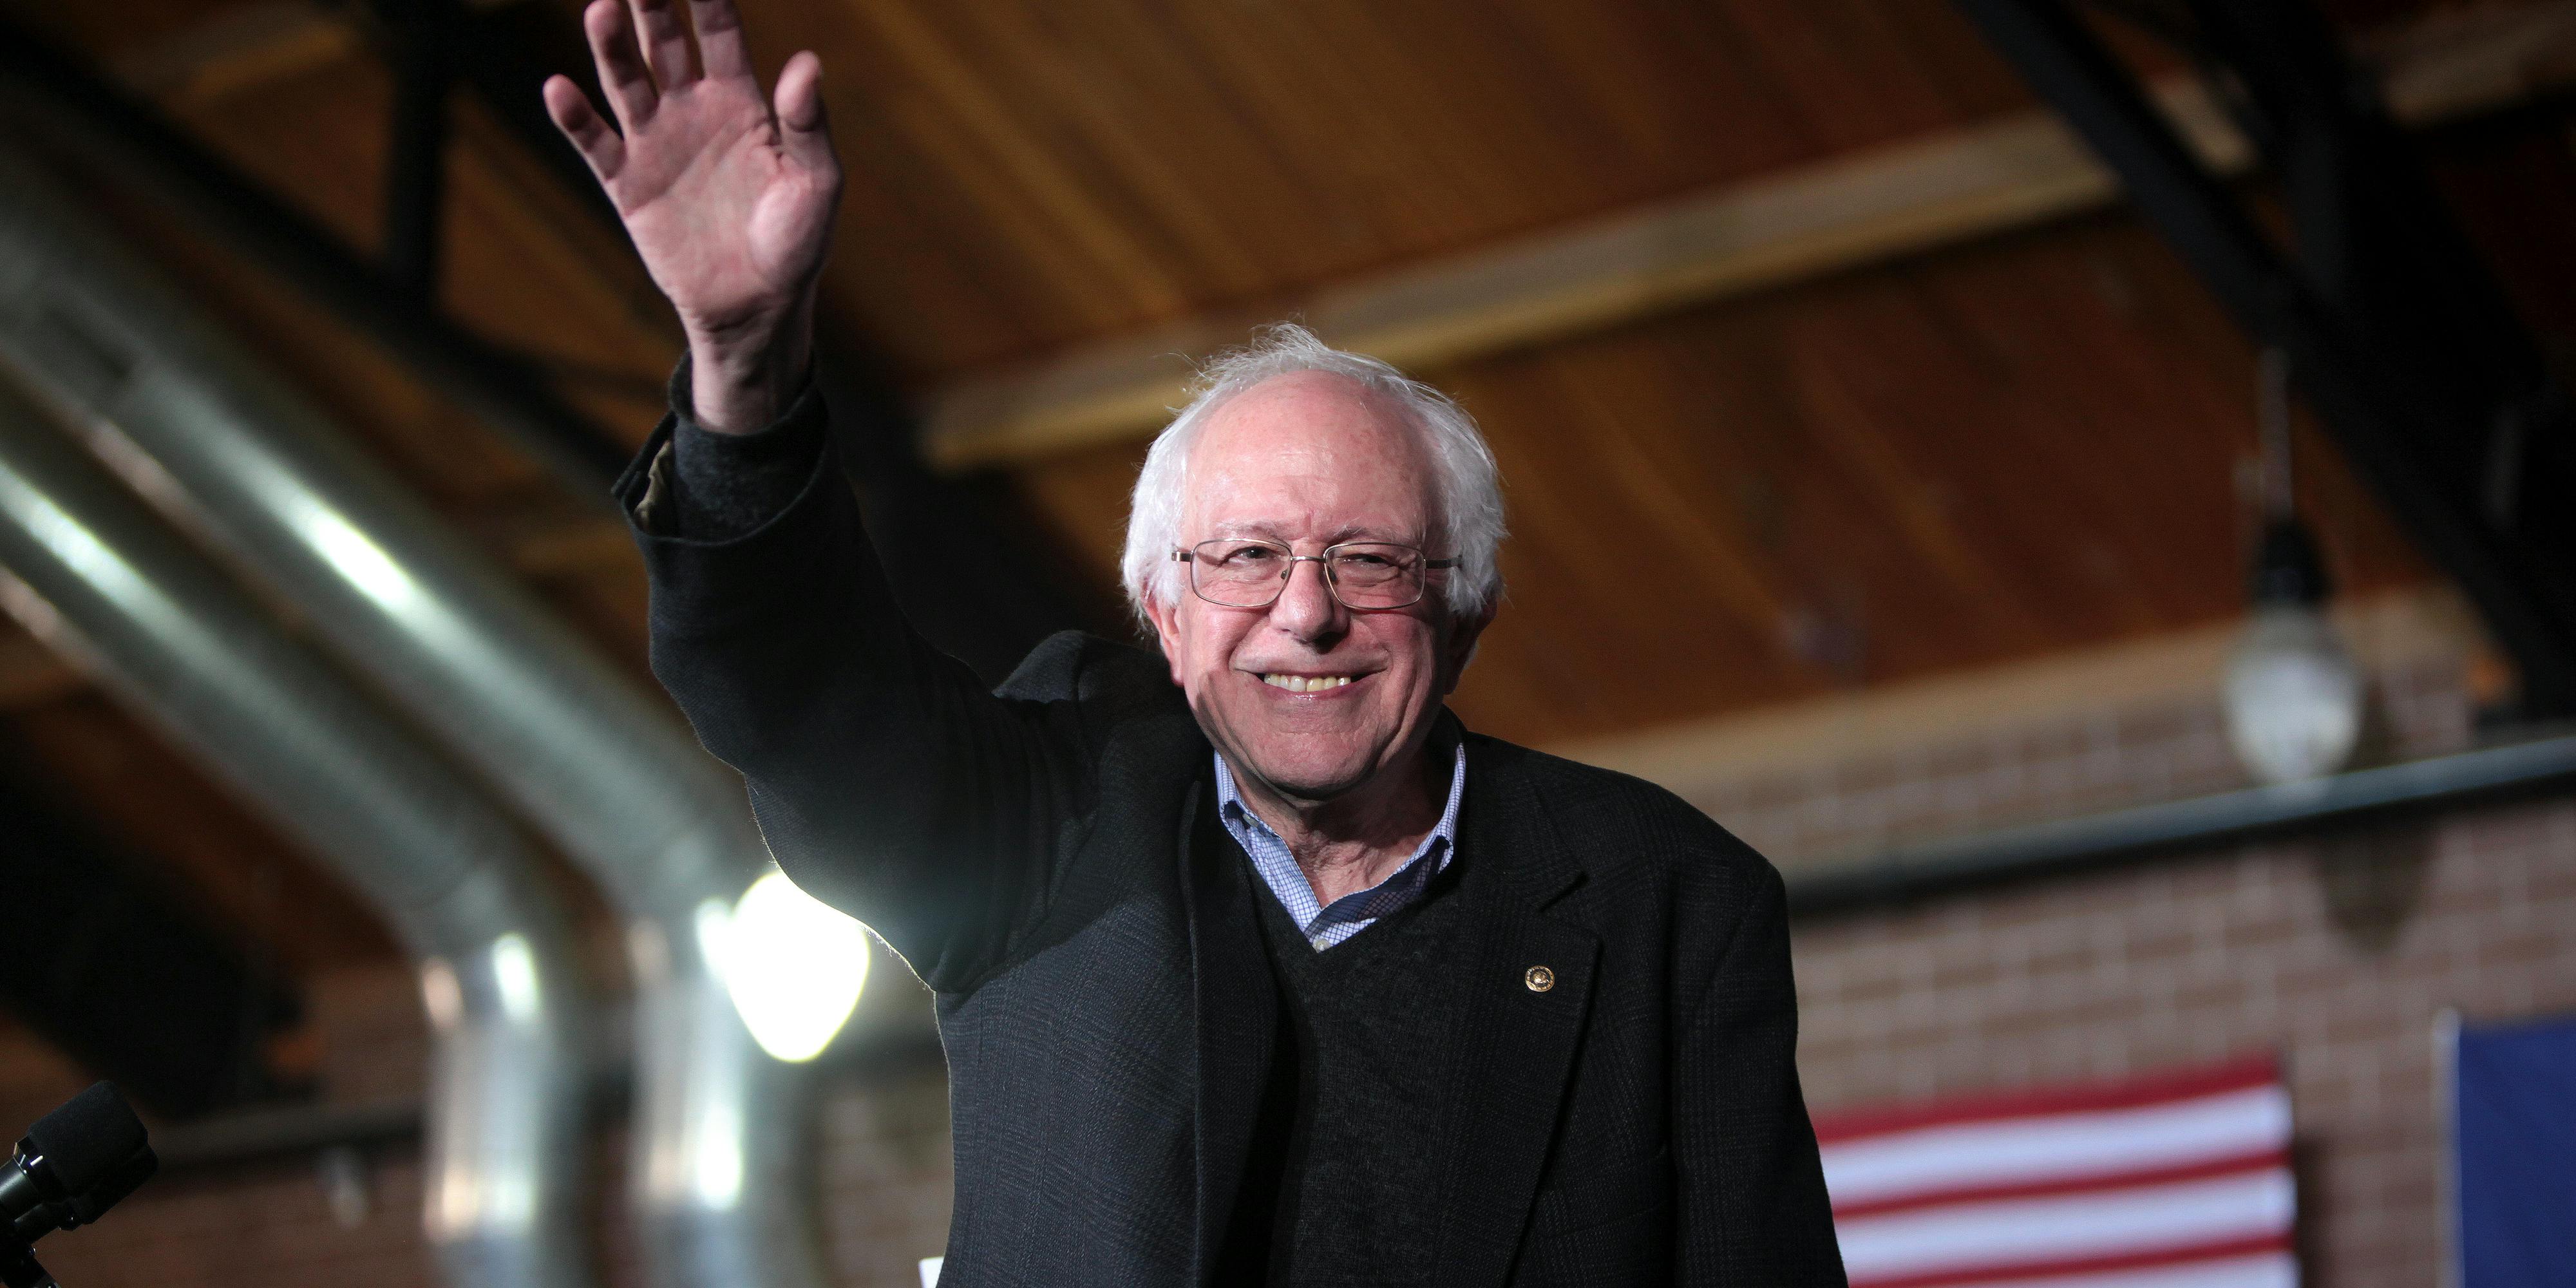 Bernie Sanders launches a petition to legalize weed